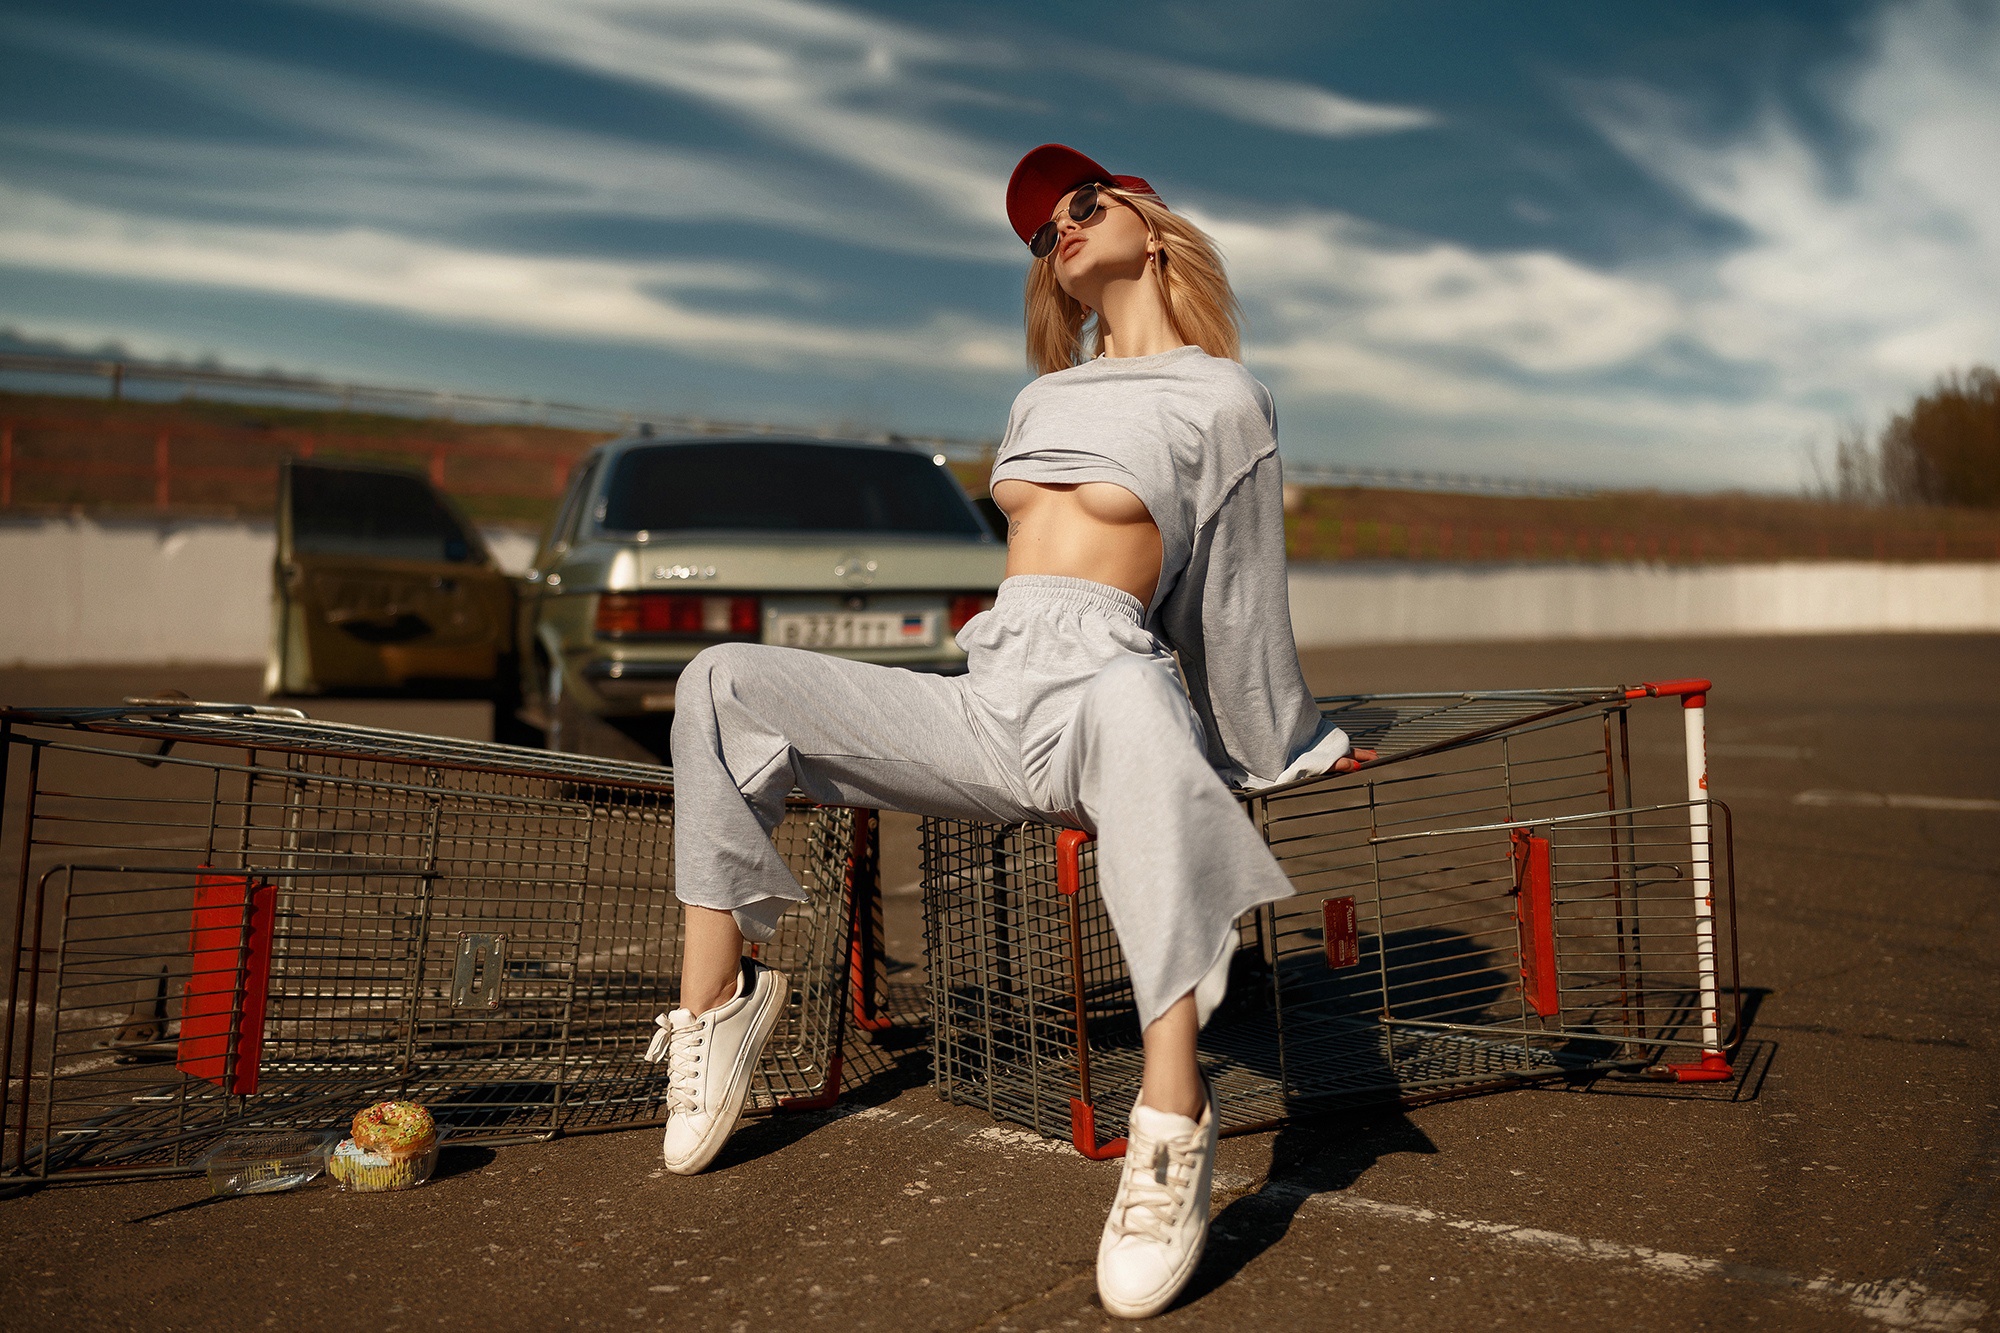 People 2000x1333 model women outdoors women outdoors spread legs shopping cart food sweets donut underboob boobs women with hats women with shades hat sunglasses blonde tiptoe car vehicle Ivan Kovalyov